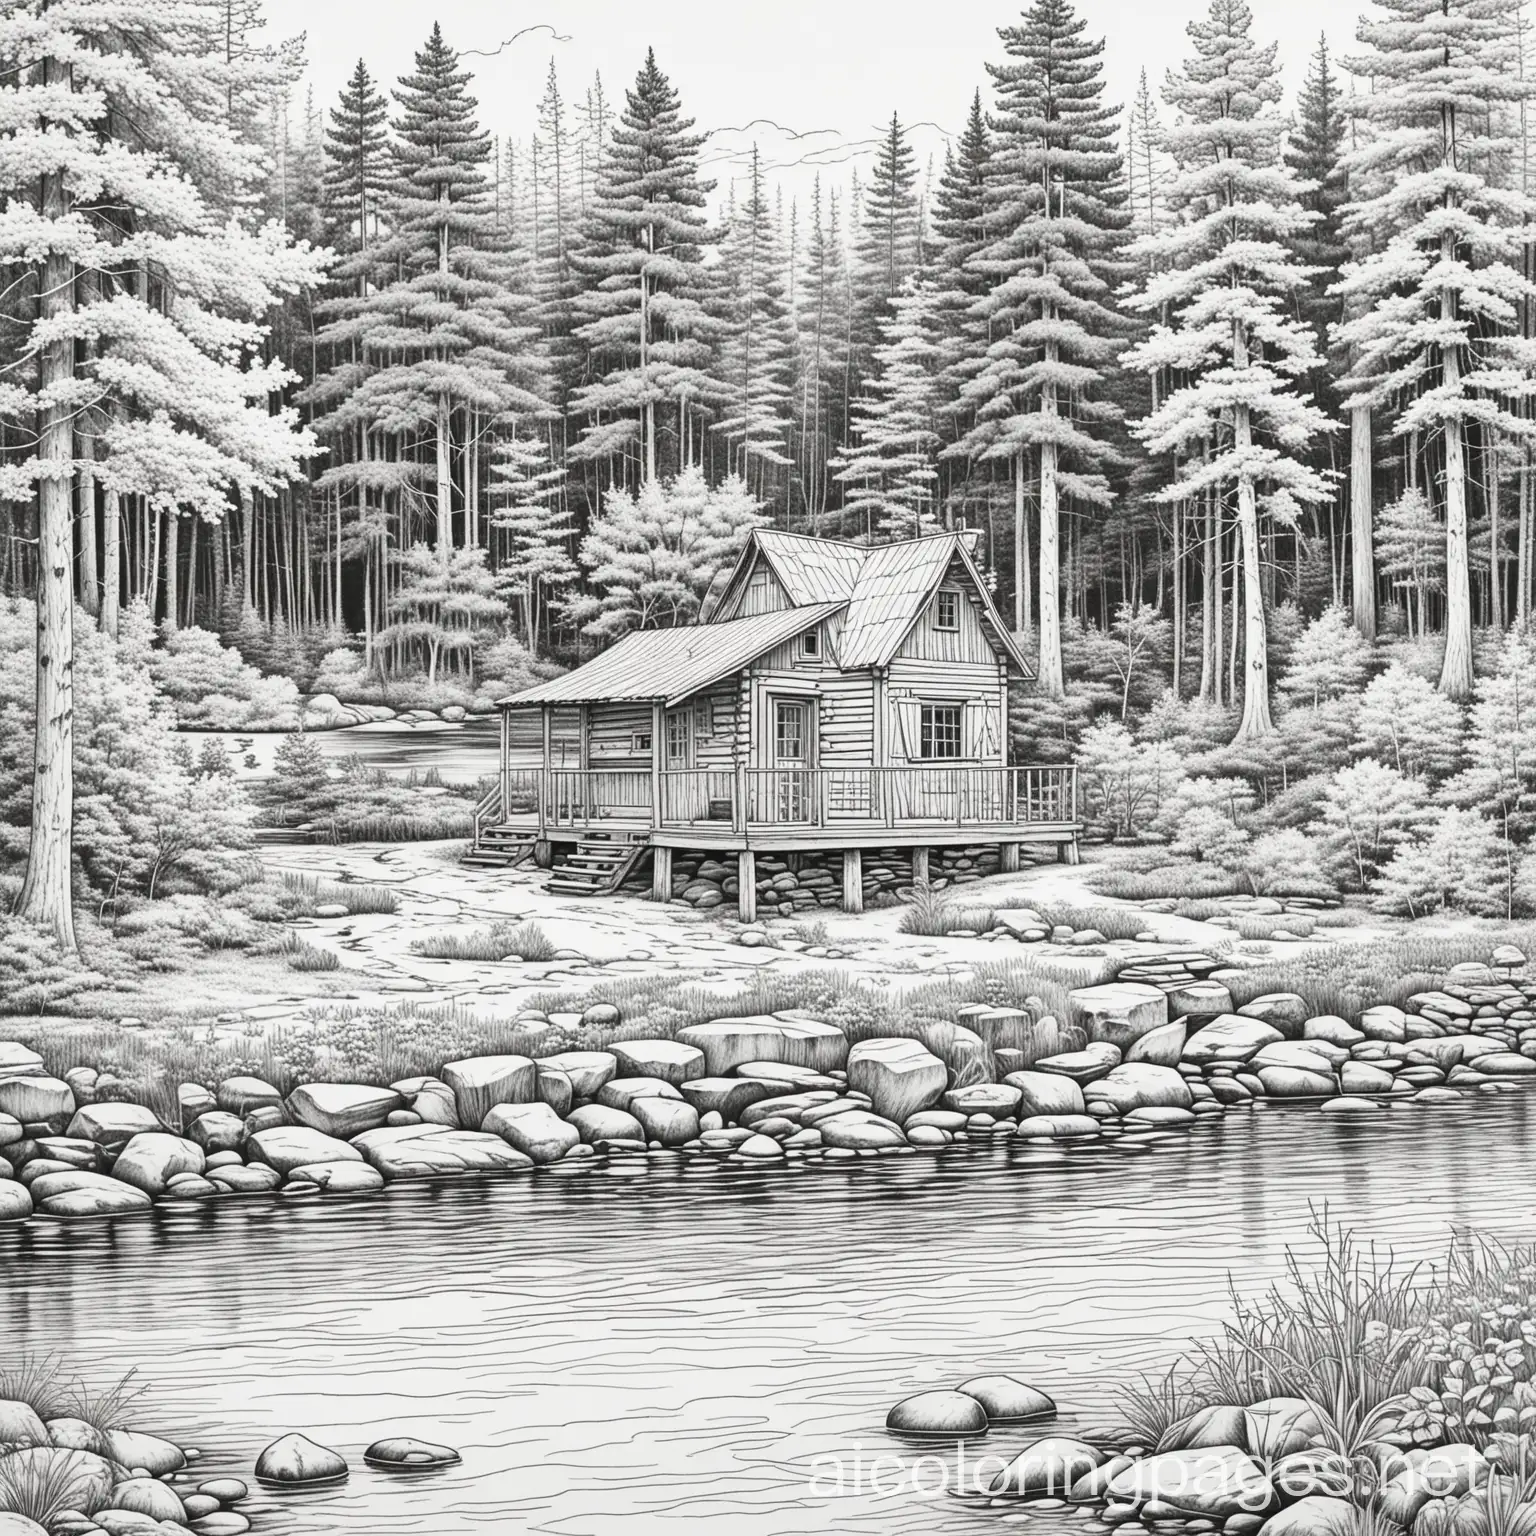 create a detailed line drawing of a little cabin in the woods near a river, Coloring Page, black and white, line art, white background, Simplicity, Ample White Space. The background of the coloring page is plain white to make it easy for young children to color within the lines. The outlines of all the subjects are easy to distinguish, making it simple for kids to color without too much difficulty